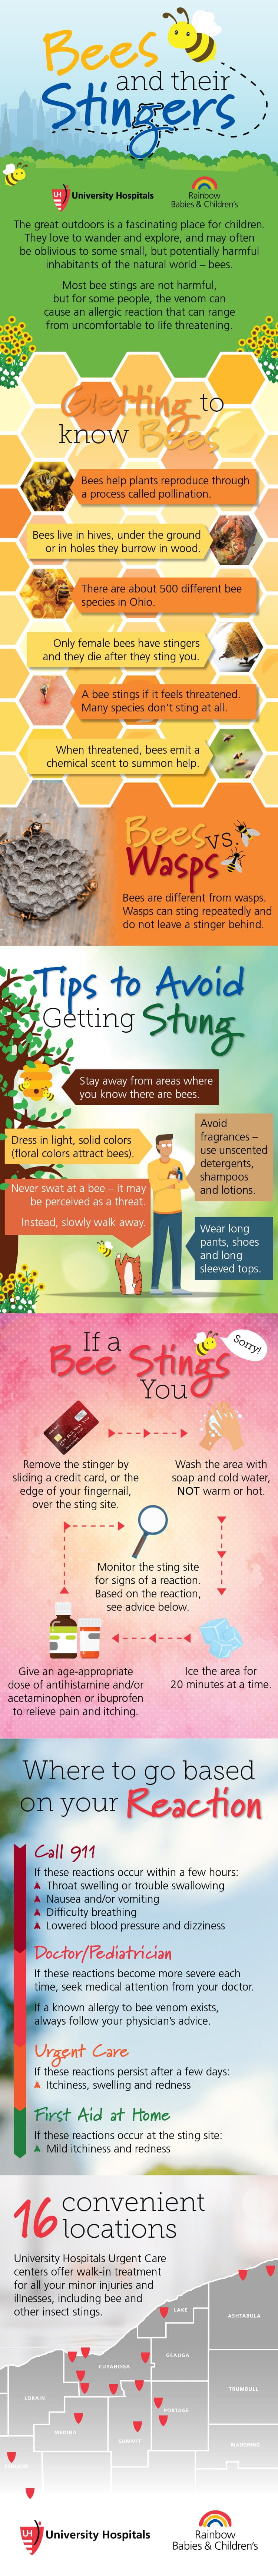 Infographic: Bees and their Stingers